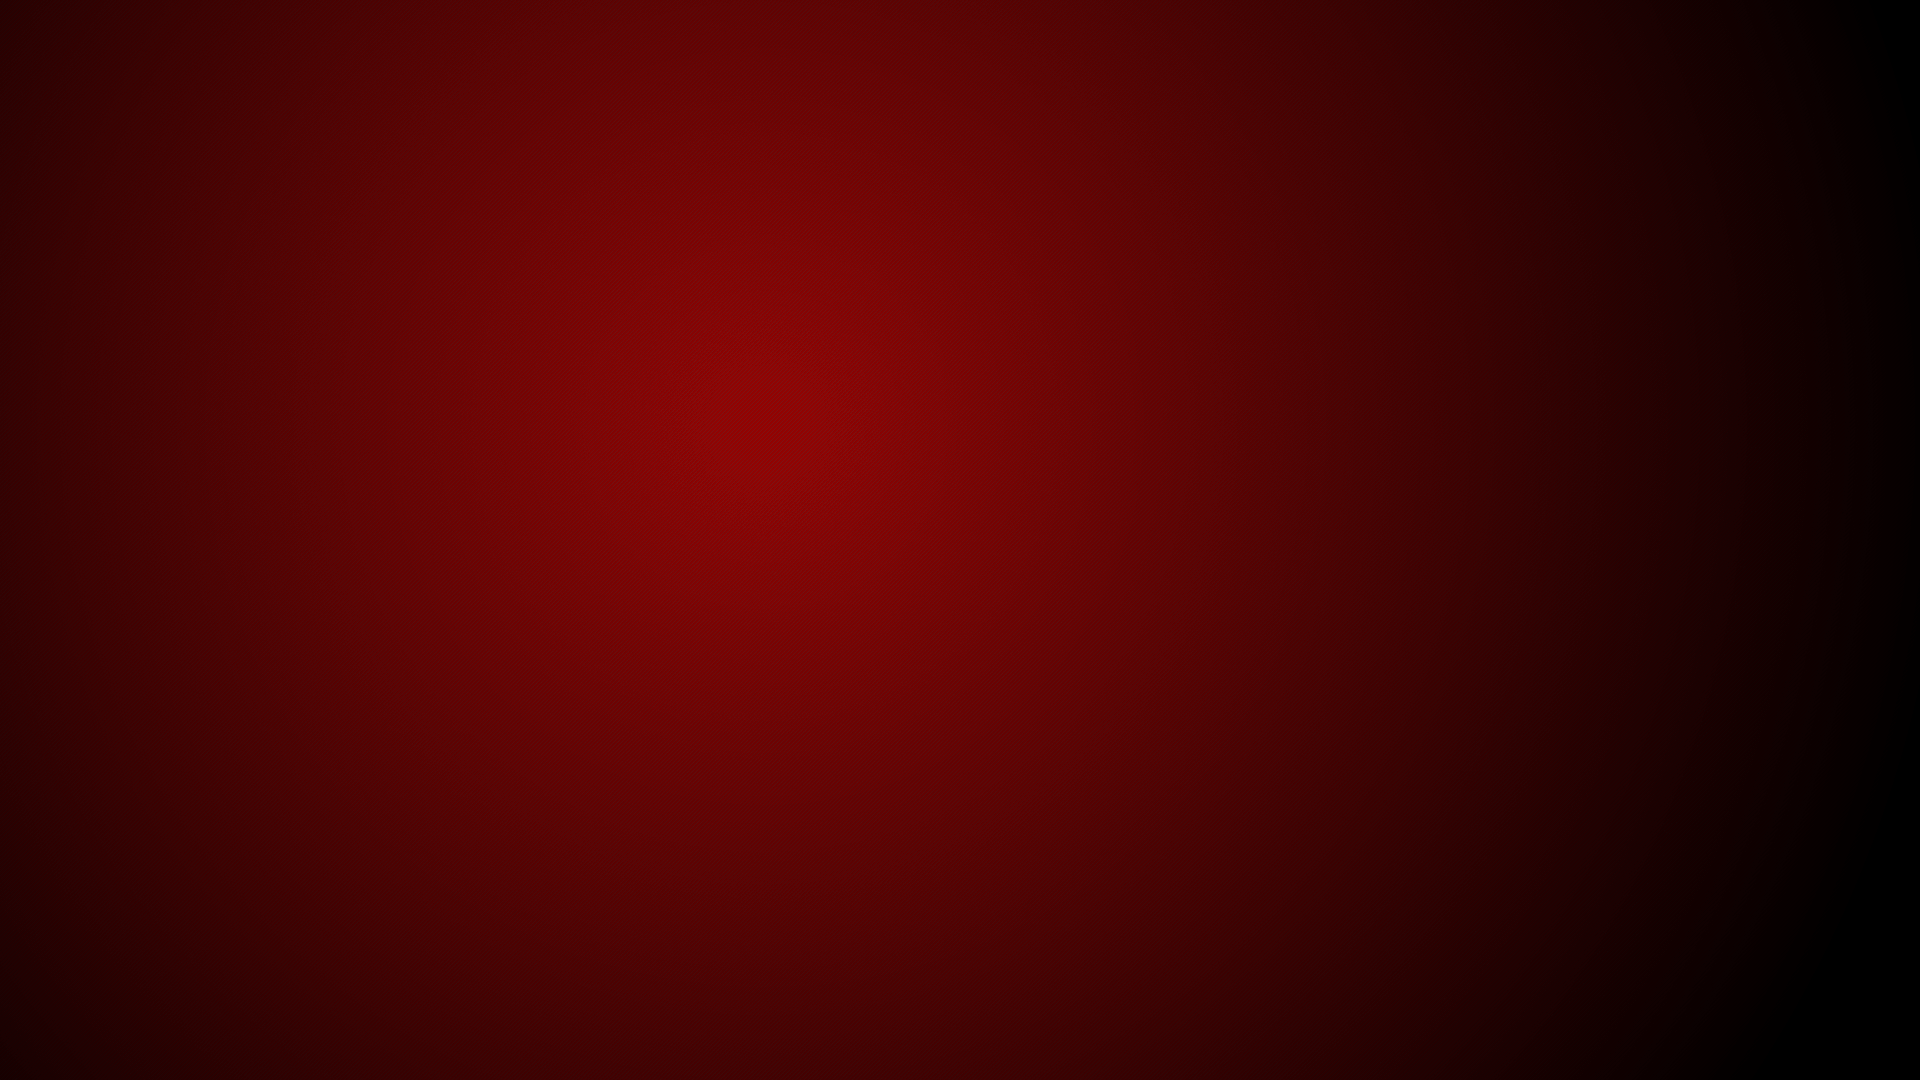 Background Gradient Red Red Background 844915 1920x1080's